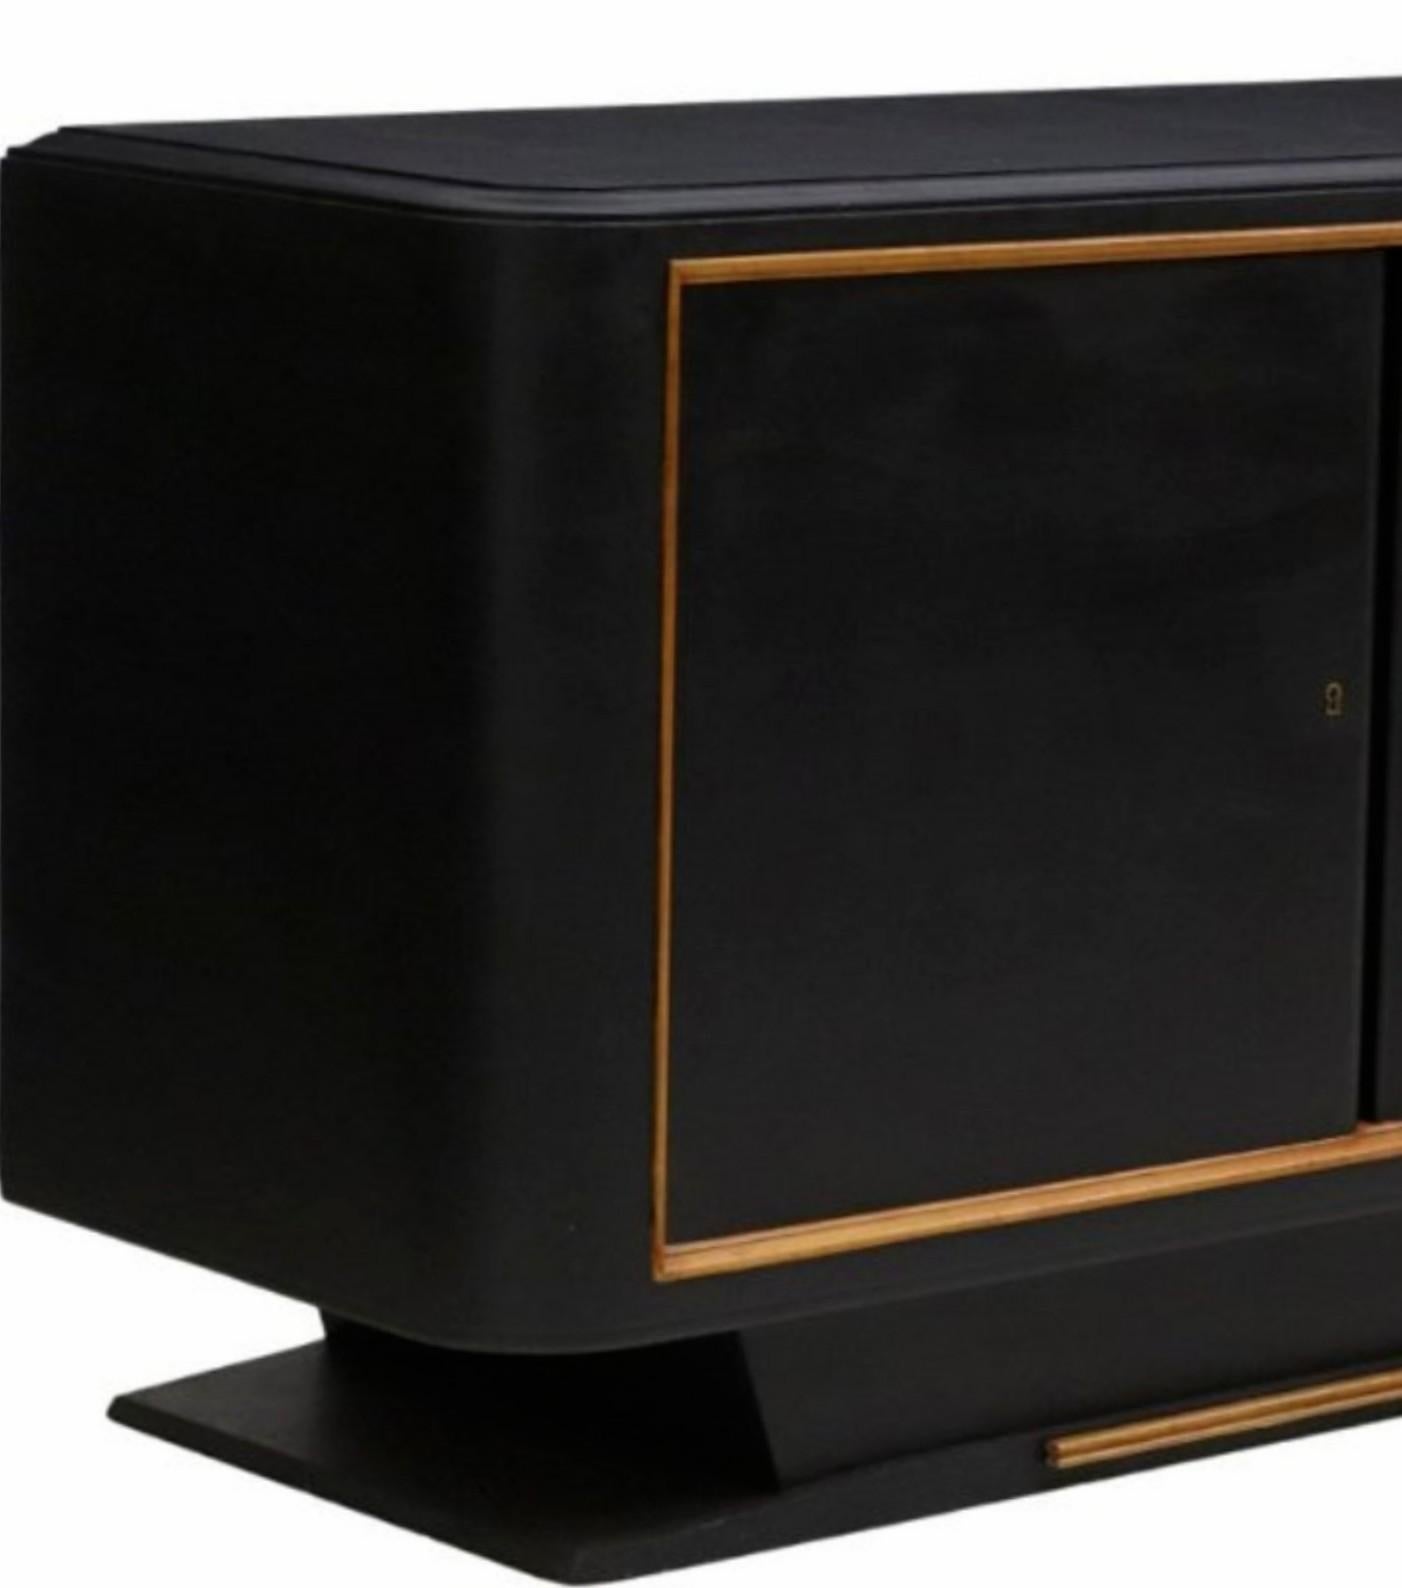 French Art Deco Moderne Painted Black Credenza Sideboard  1